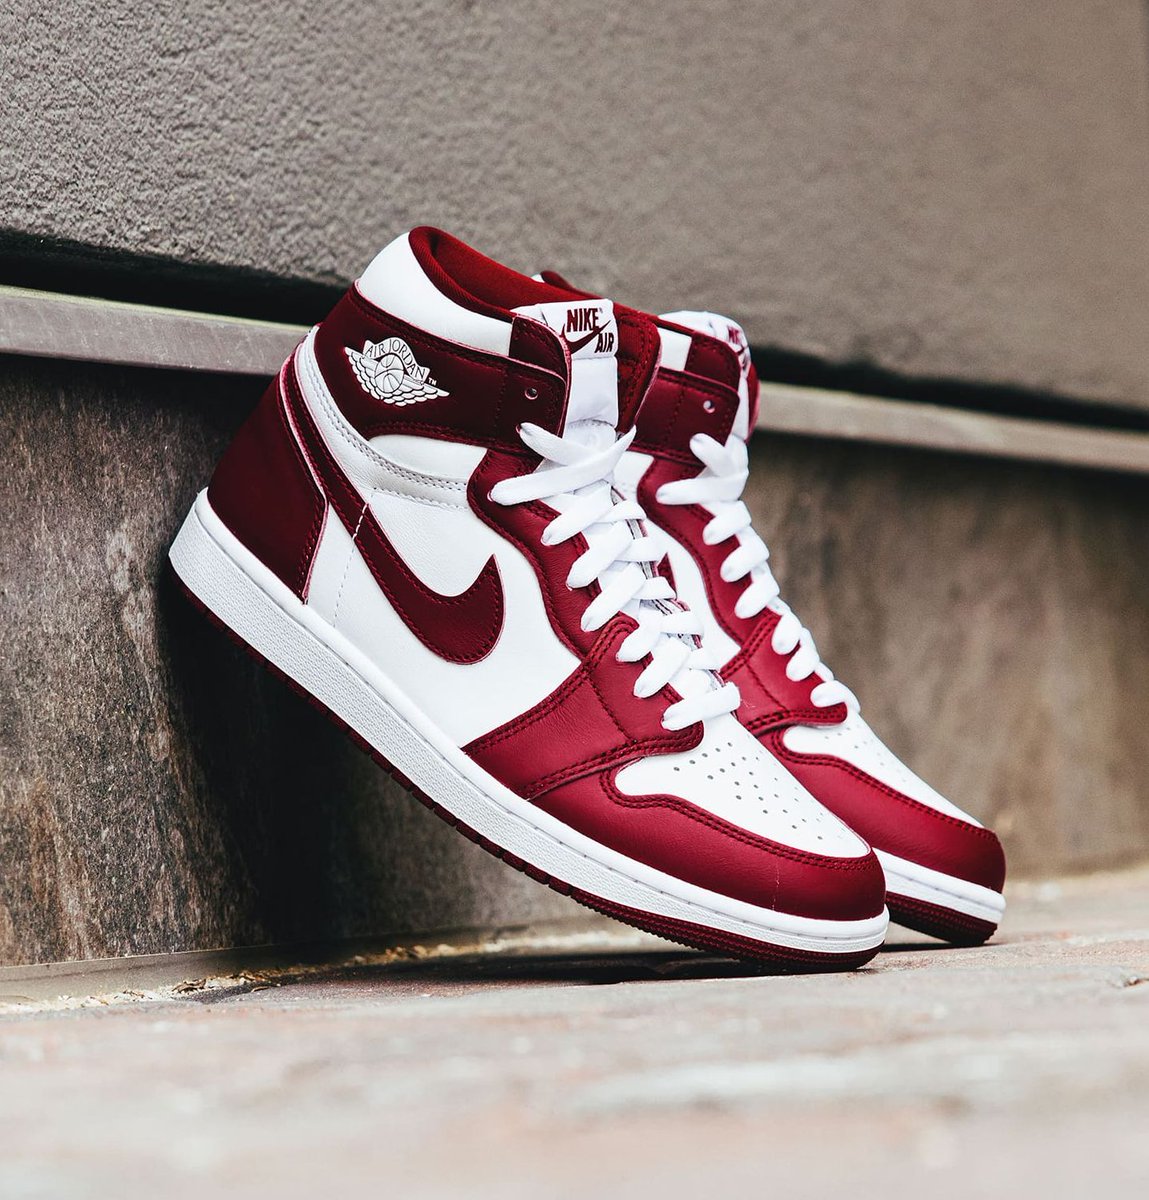 NEW PRICE DROP 🔥 Nearly 40% OFF the Air Jordan 1 High OG 'Artisanal Red' BUY HERE: bit.ly/4bjcZEZ